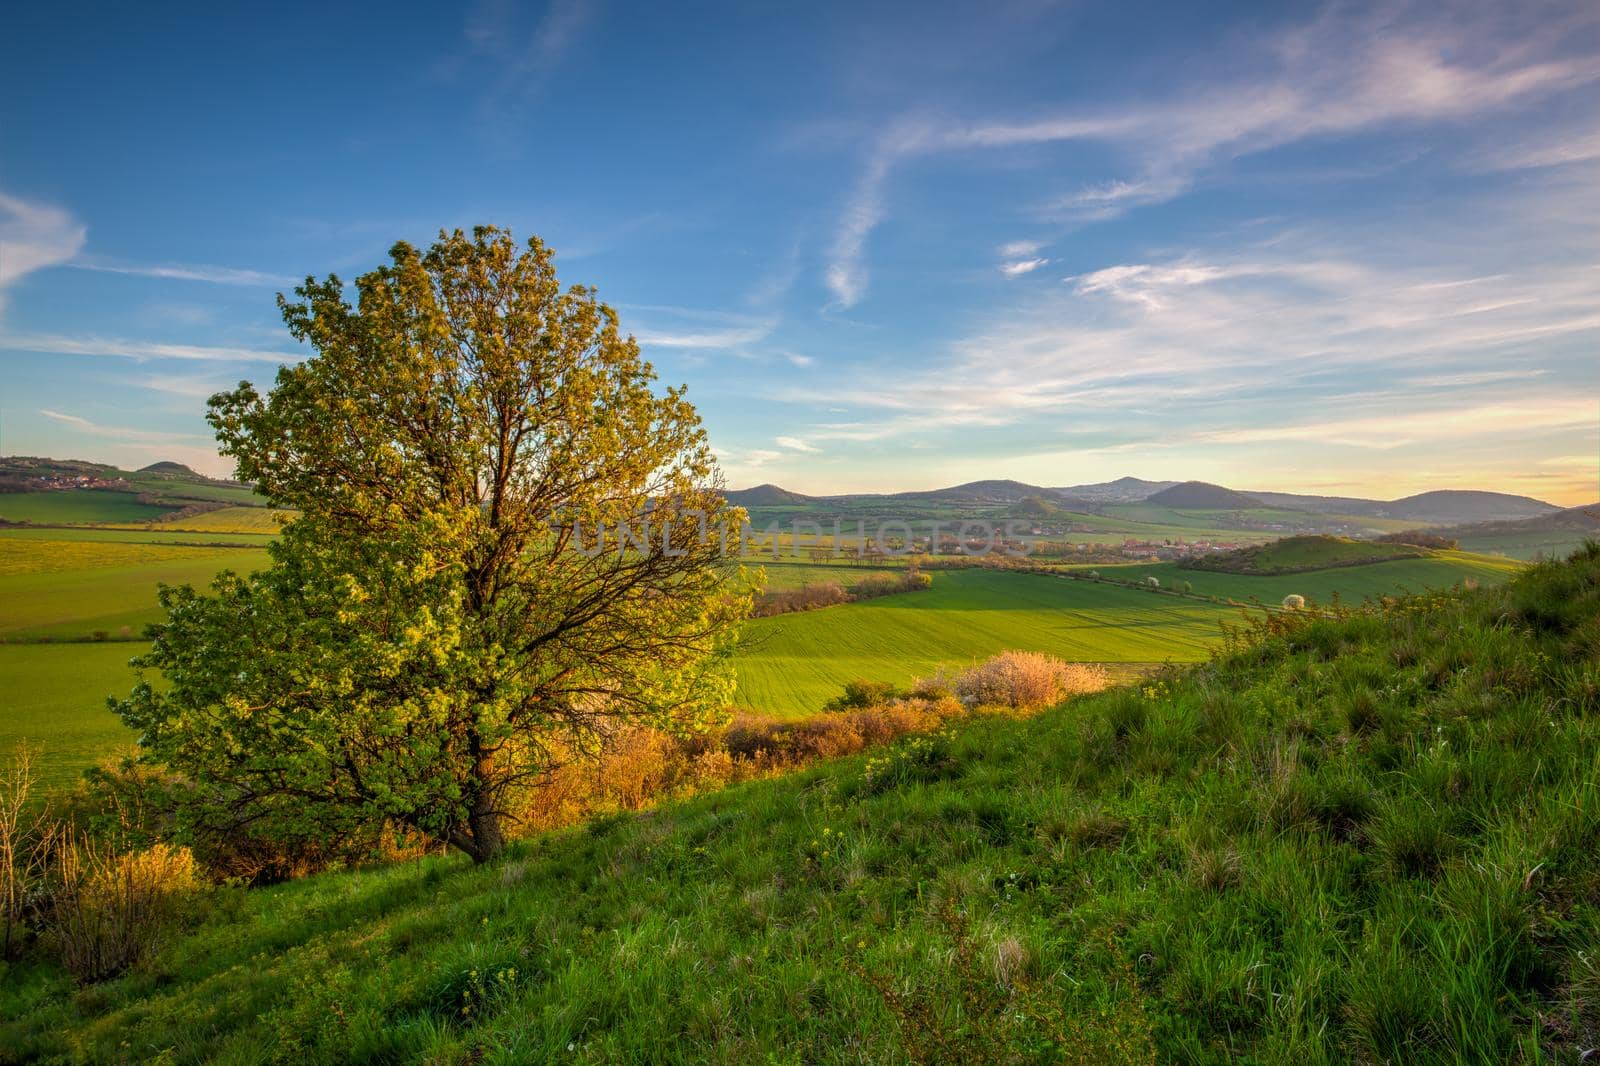 Spring morning in Central Bohemian Highlands.It is a mountain range located in northern Bohemia in the Czech Republic.The range is about 80 km long, extending from Ceska Lipa in the northeast to Louny